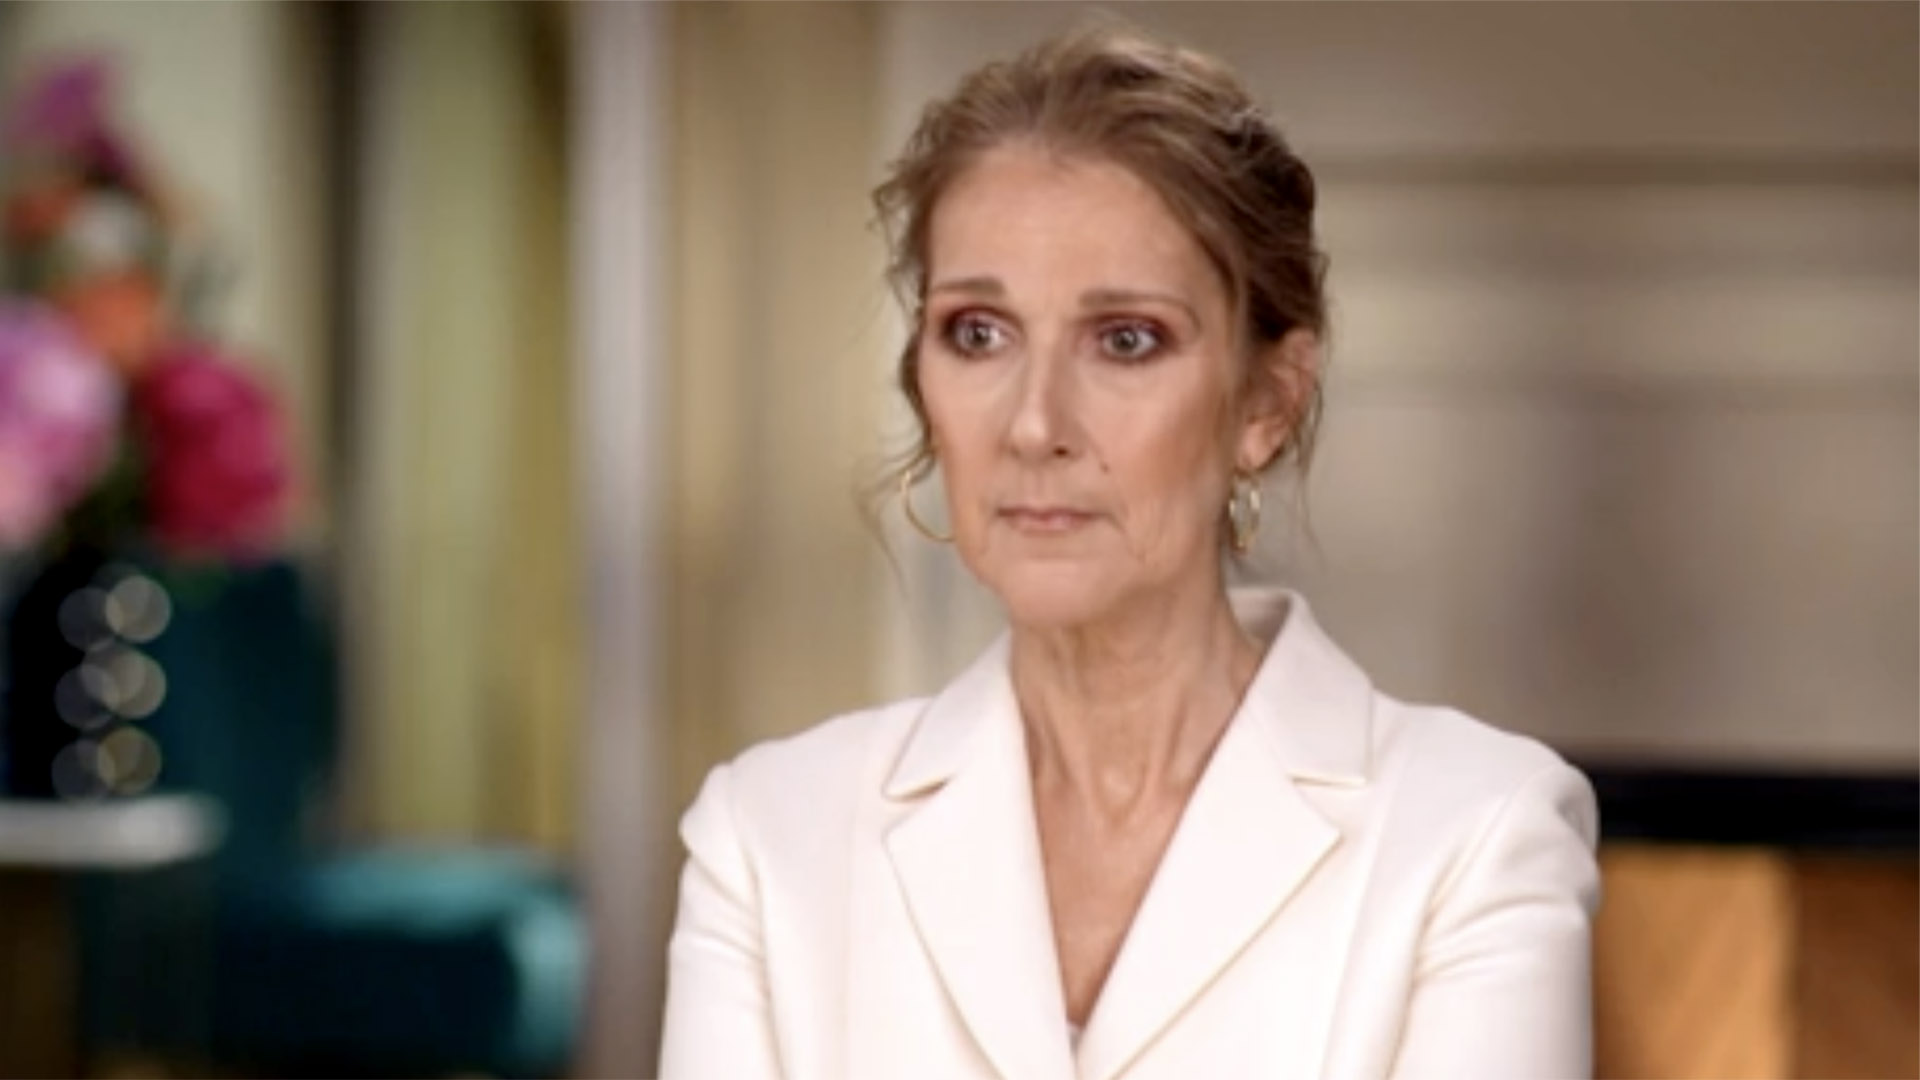 Celine Dion on why she decided to come forward with illness